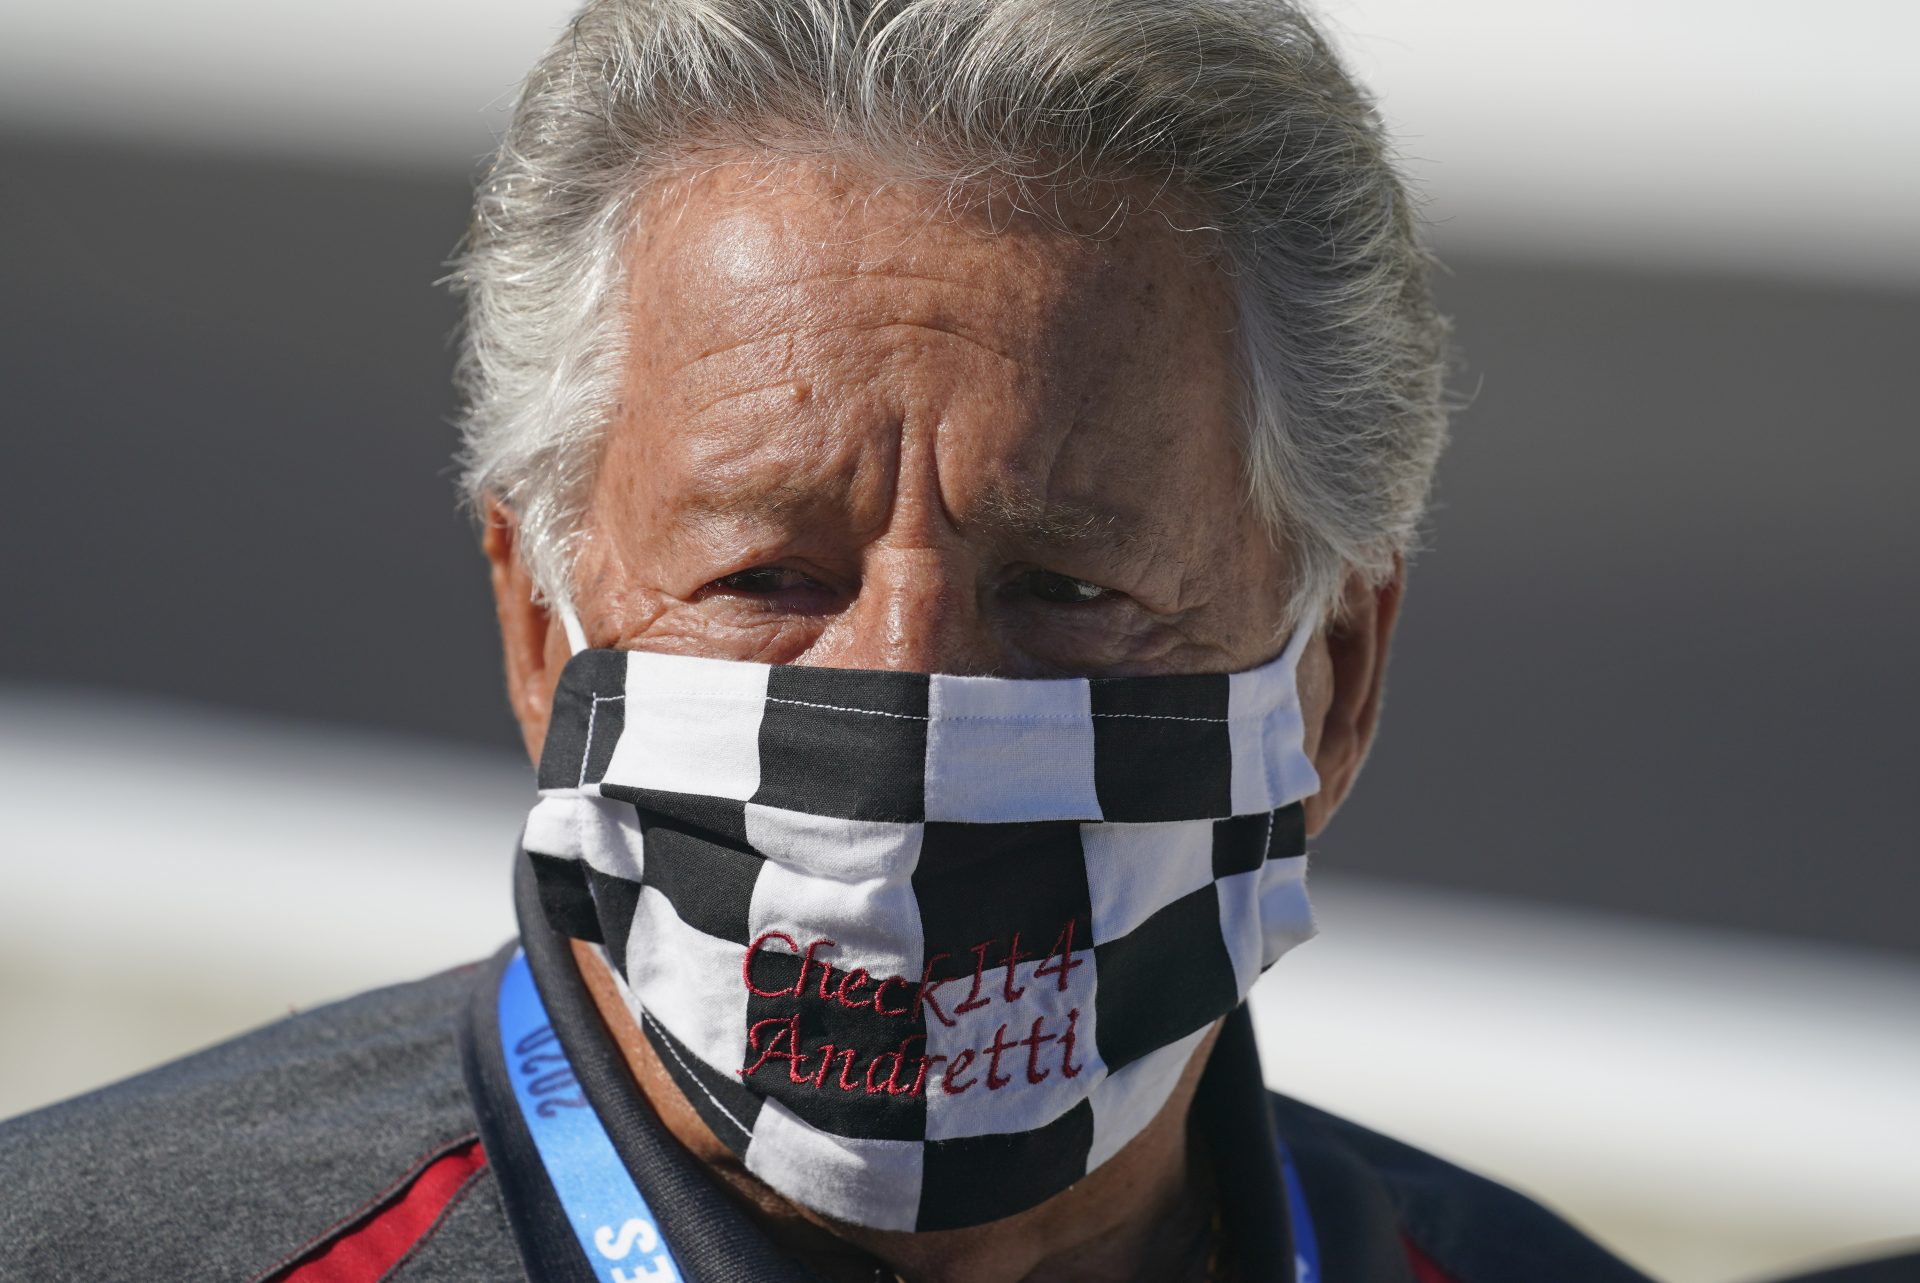 In this Aug. 21, 2020, file photo, Mario Andretti looks on before the final practice session for the Indianapolis 500 auto race at Indianapolis Motor Speedway.